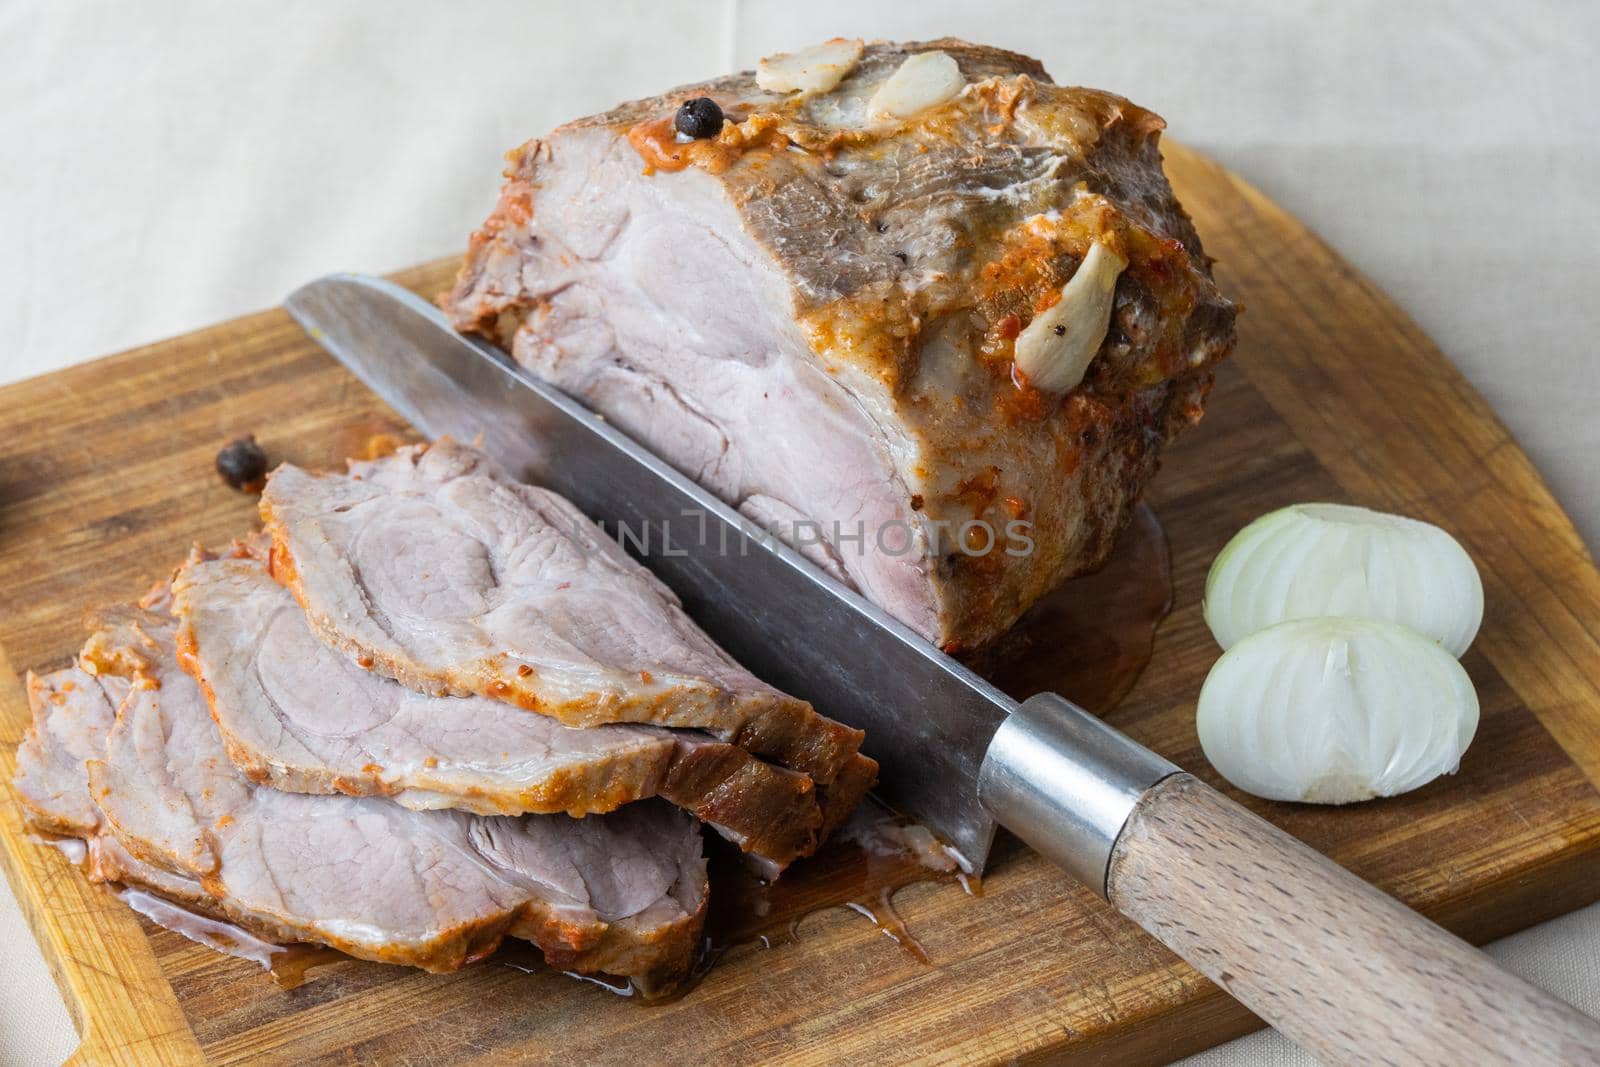 juicy meat pork neck in a marinade with garlic and pepper baked in the oven lies on the cutting board. Several steak-like slices are cut from it. Next to it is half an onion by olex